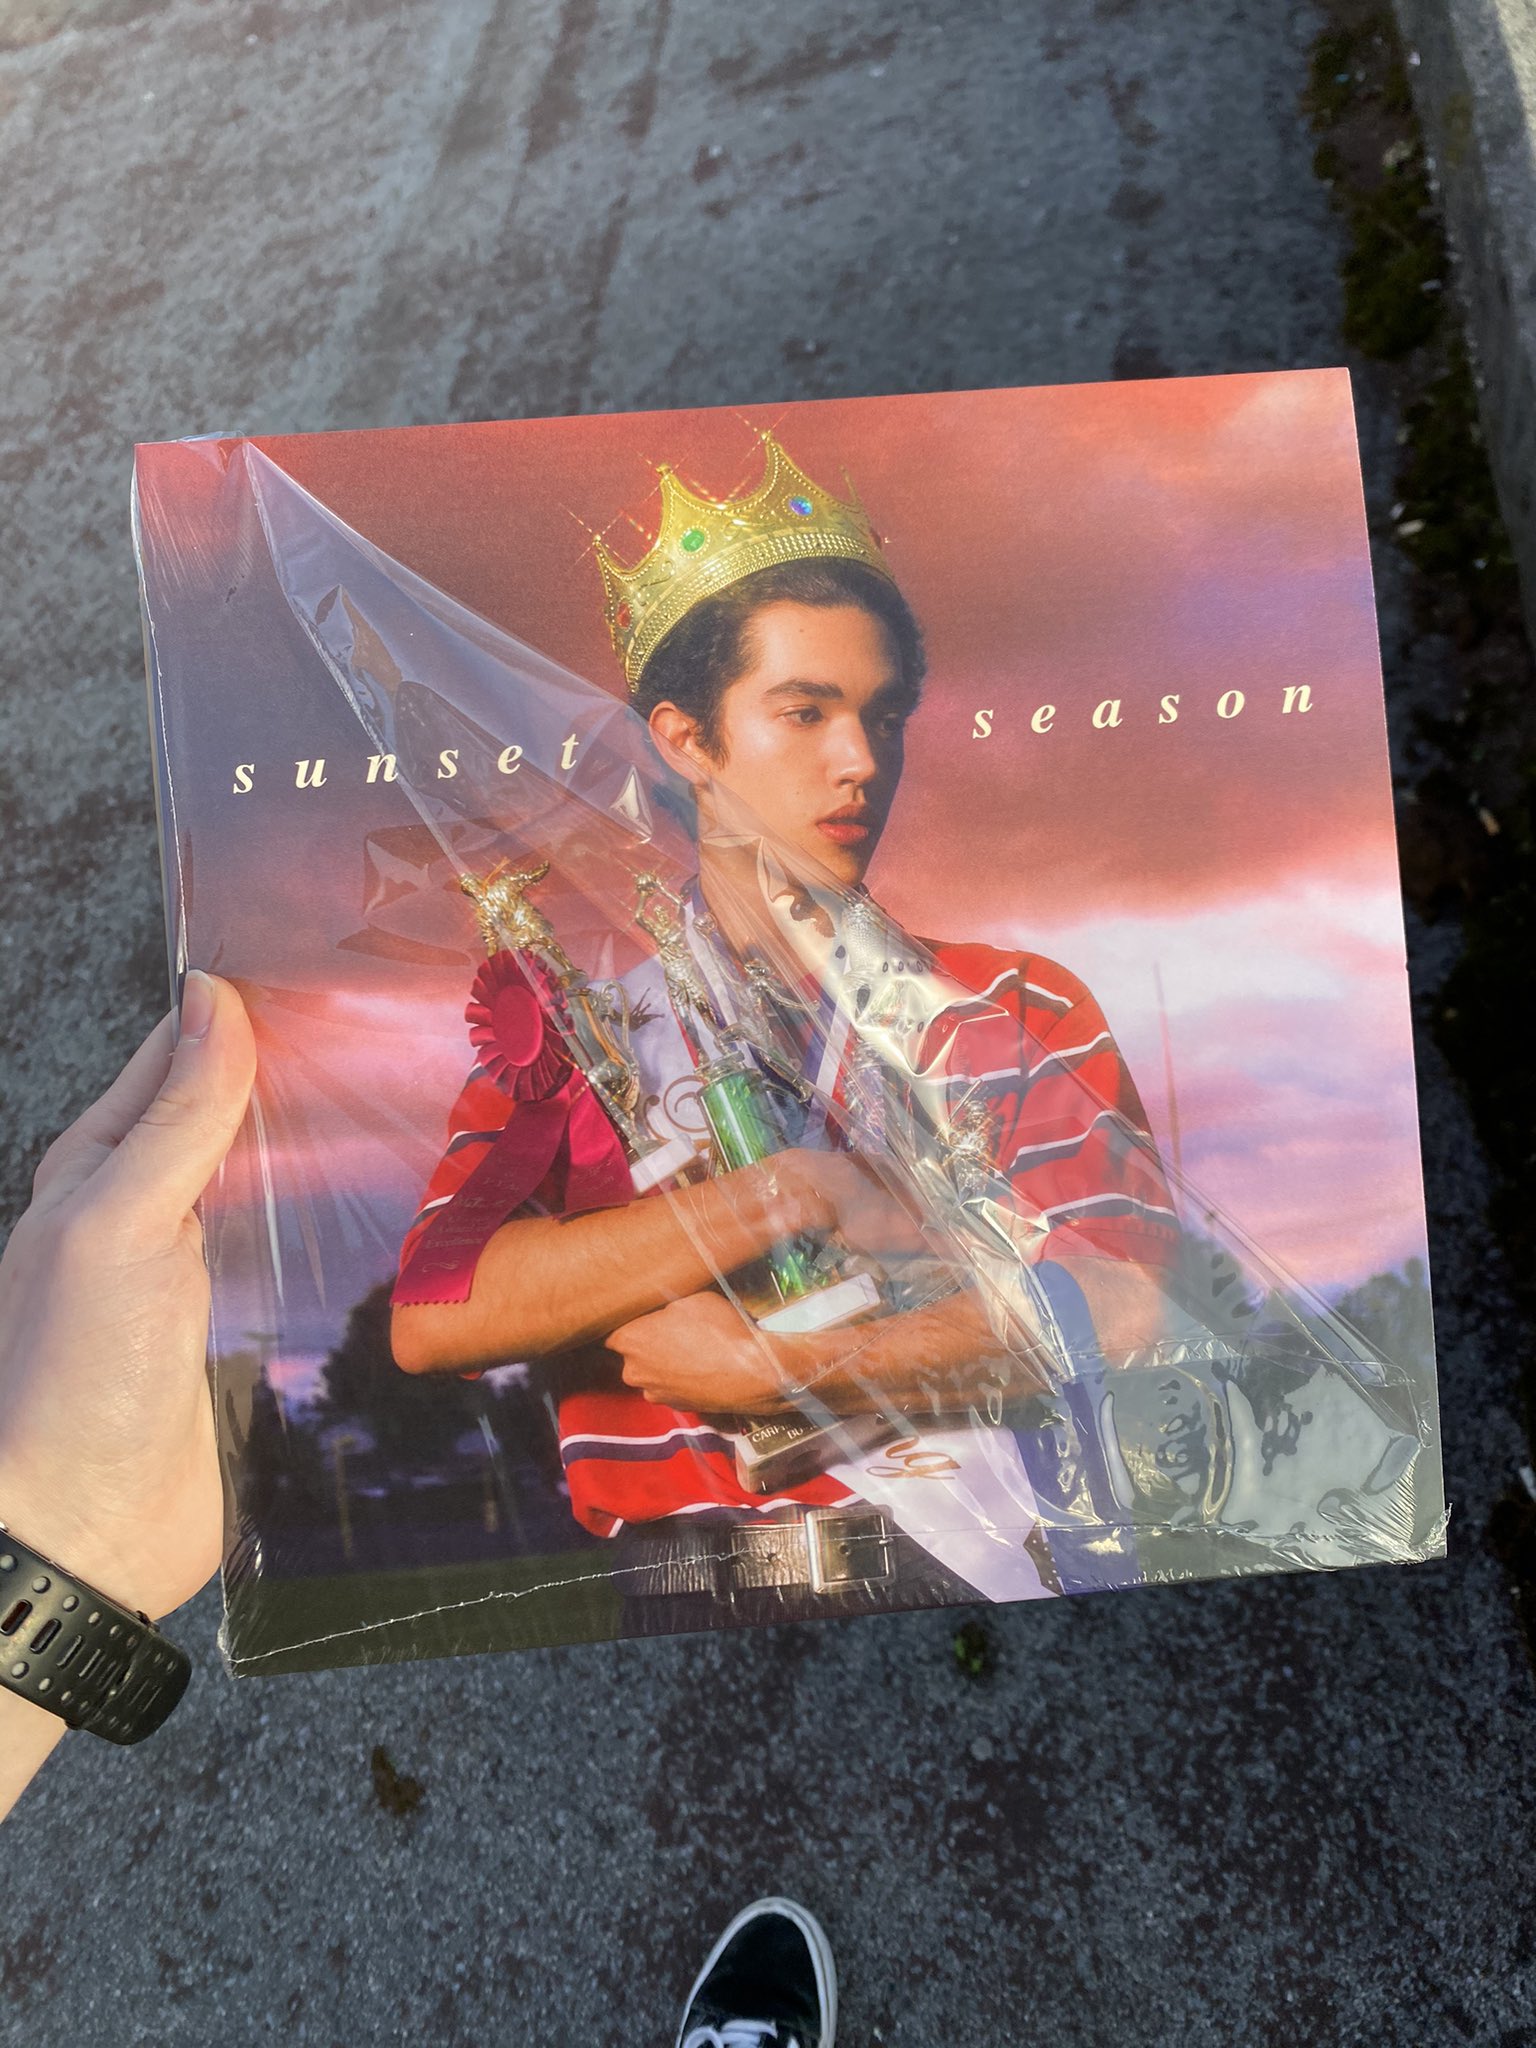 conan gray updates on Twitter: "a new limited edition version of conans sunset season vinyl has been released for (2/26) link: https://t.co/avRvMd1BO1 https://t.co/ktOR3U7gYh" / Twitter